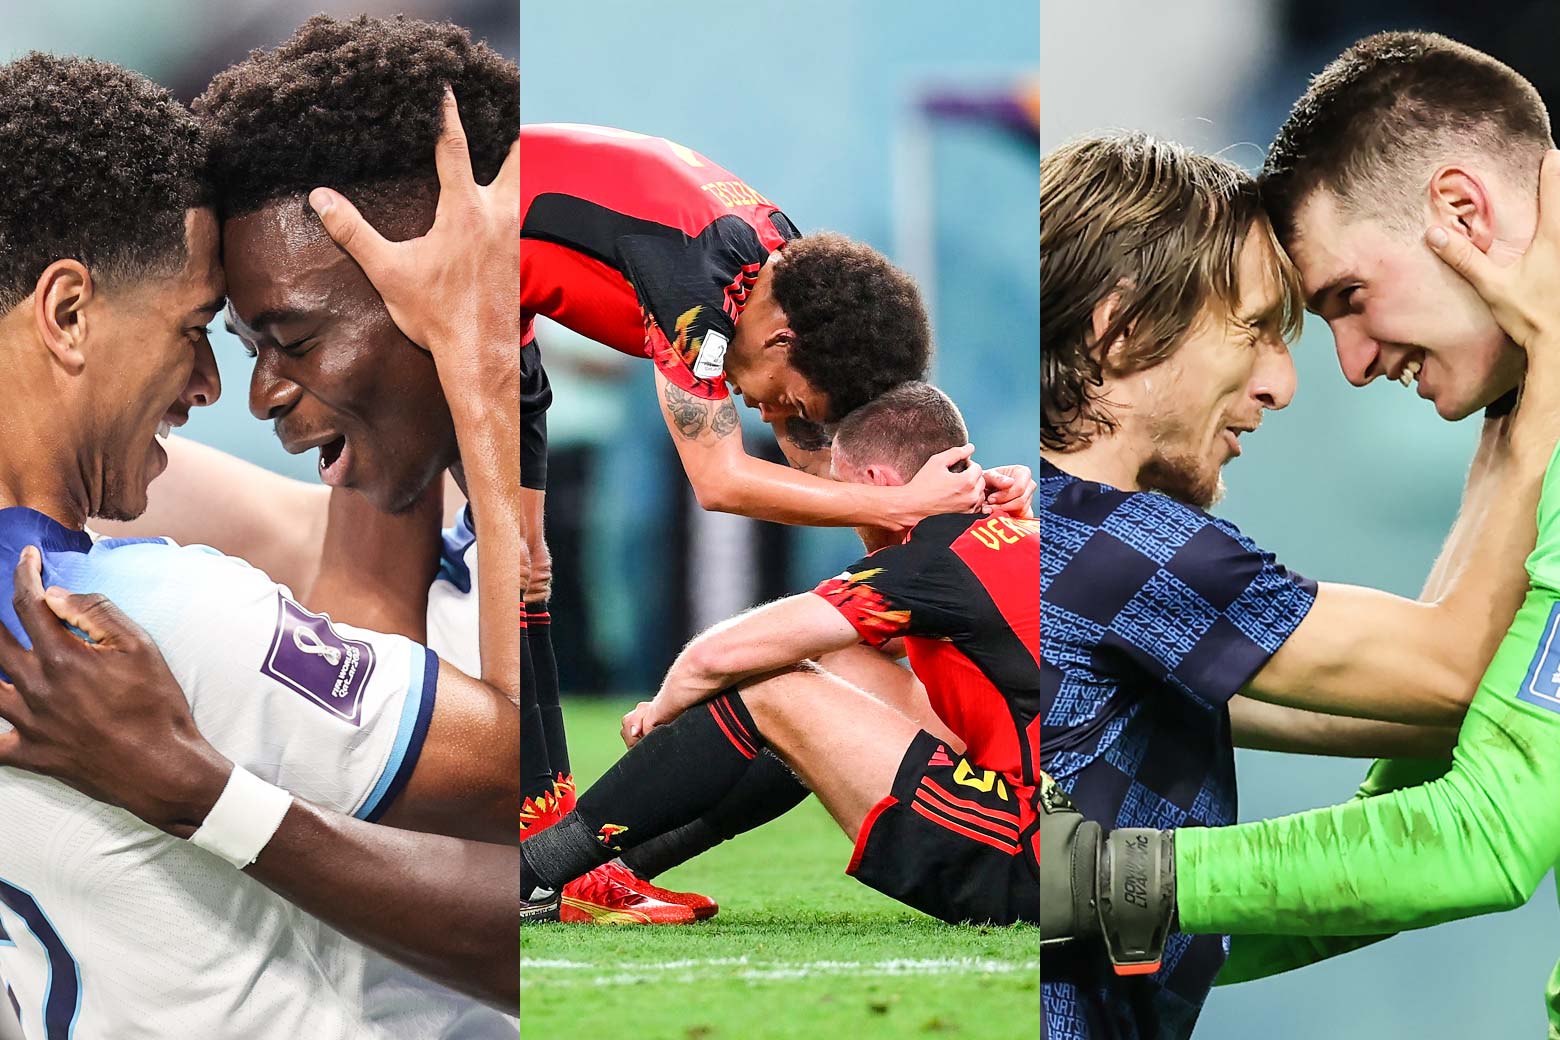 A collage of three photos, from L-R: Bukayo Saka and Jude Bellingham press their foreheads together as they both smile. Jan Vertonghen sits on the field with Axel Witsel leaning over him, their heads touching. Luka Modric and Dominik Livakovic gaze into each other's eyes with their foreheads pressed together.